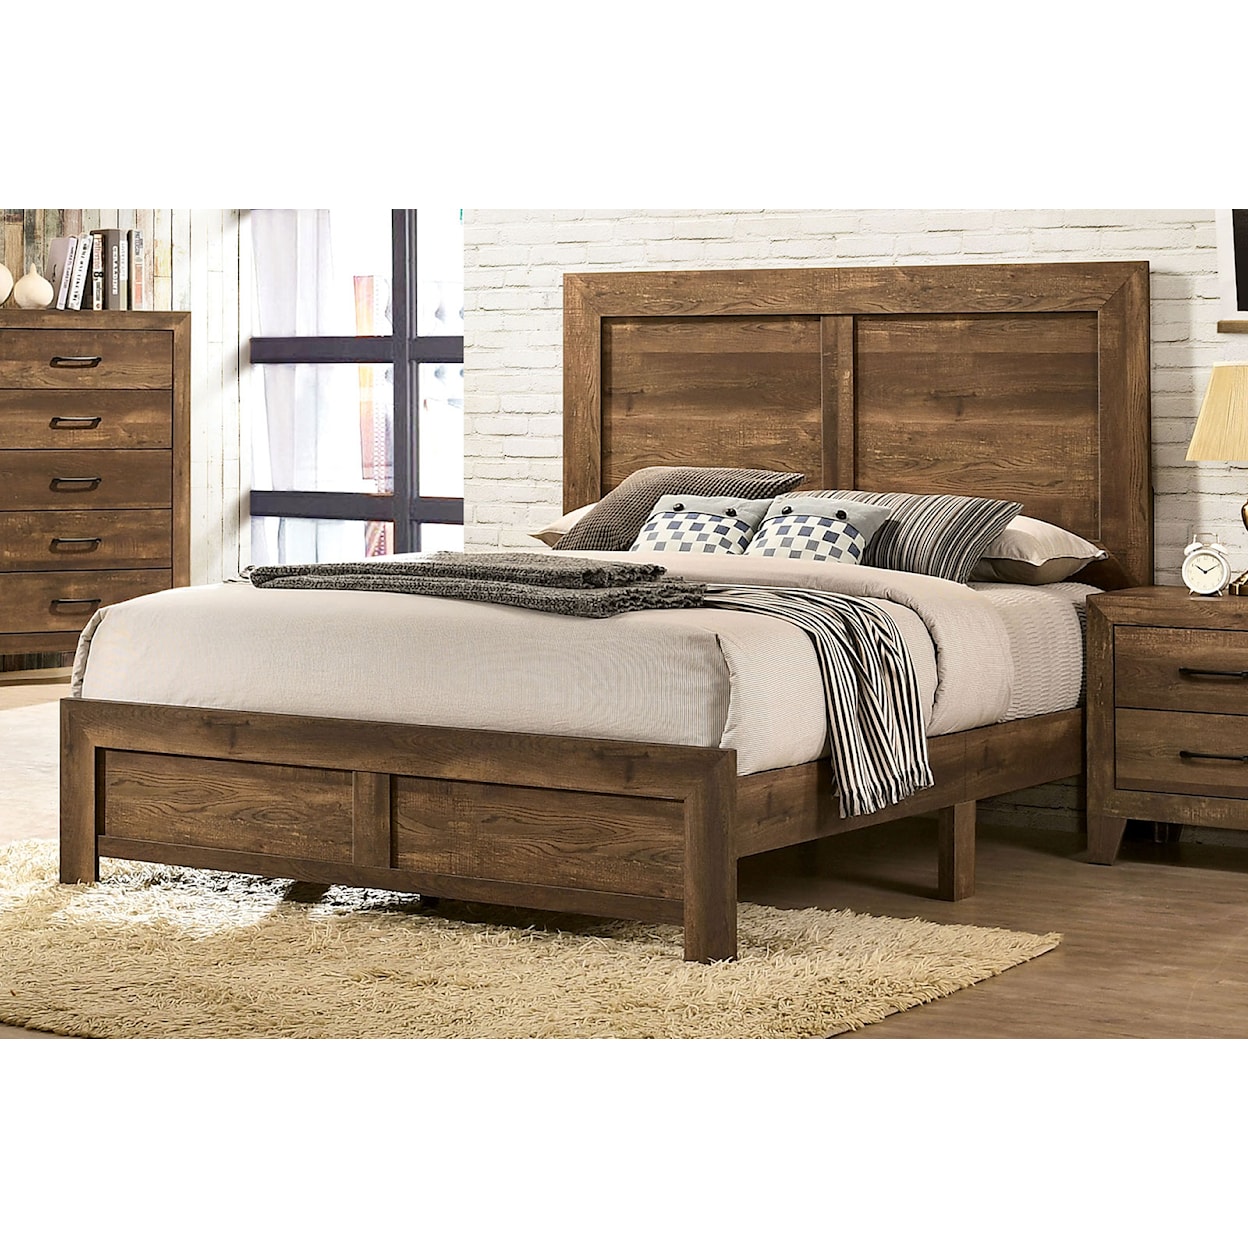 Furniture of America Wentworth Full Bed